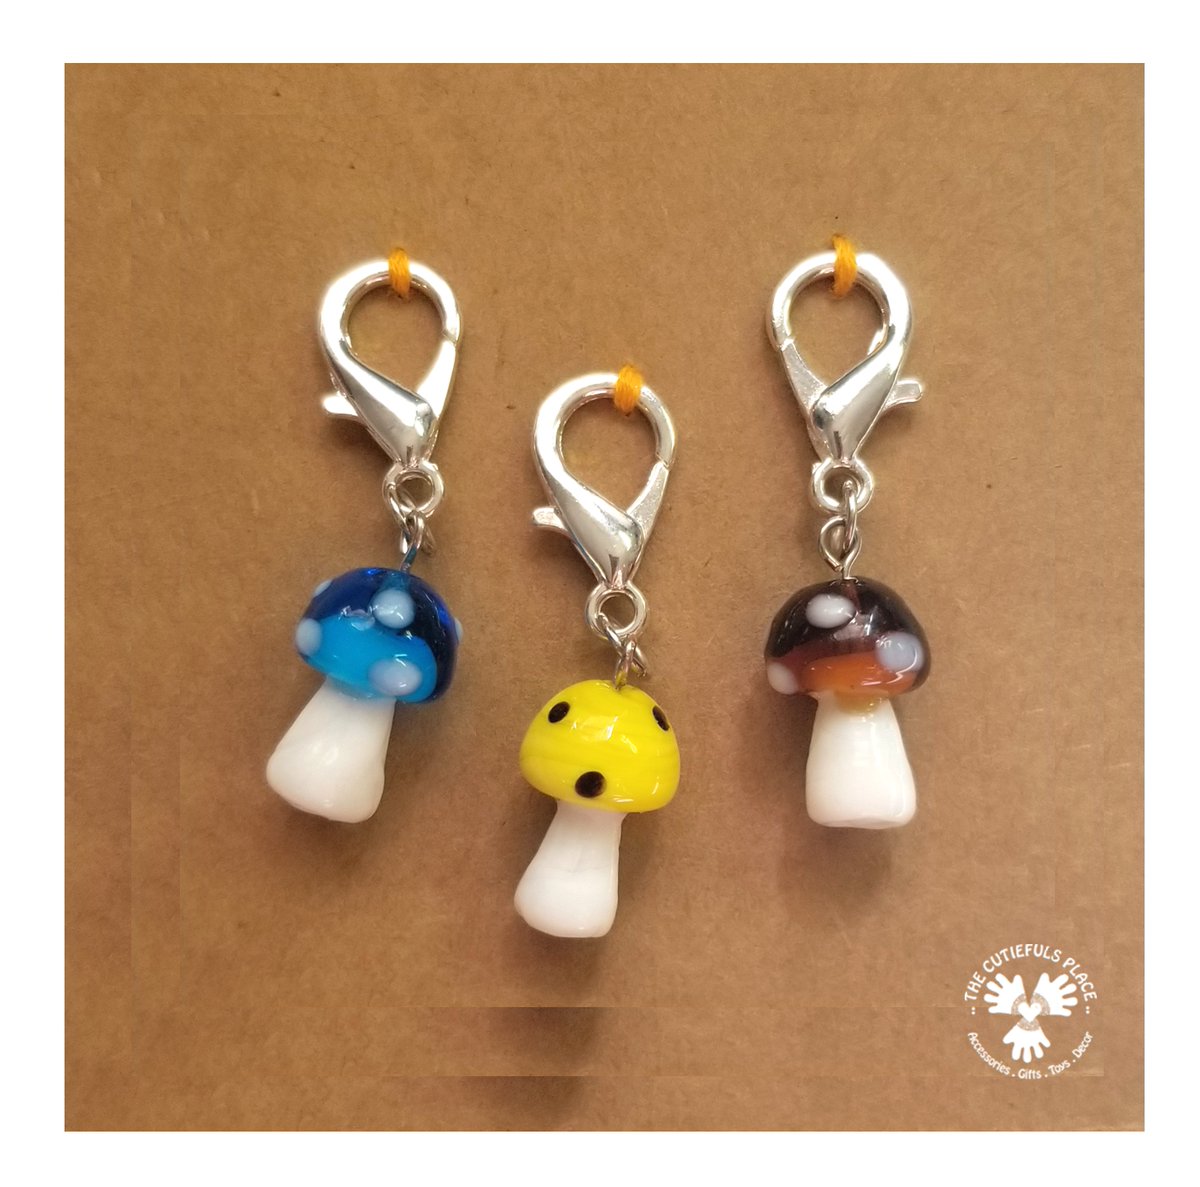 🍁🍁 We are just 43 days away from #fall, can you believe it?! Let's start getting into the #autumn mood with these #cute #mushroom #stitchmarkers! (🍄 etsy.com/listing/752076…)

#etsy .@etsy #craftychaching #justartisan #shoppershour #elevenseshour #crochet #yarnlover #knitting